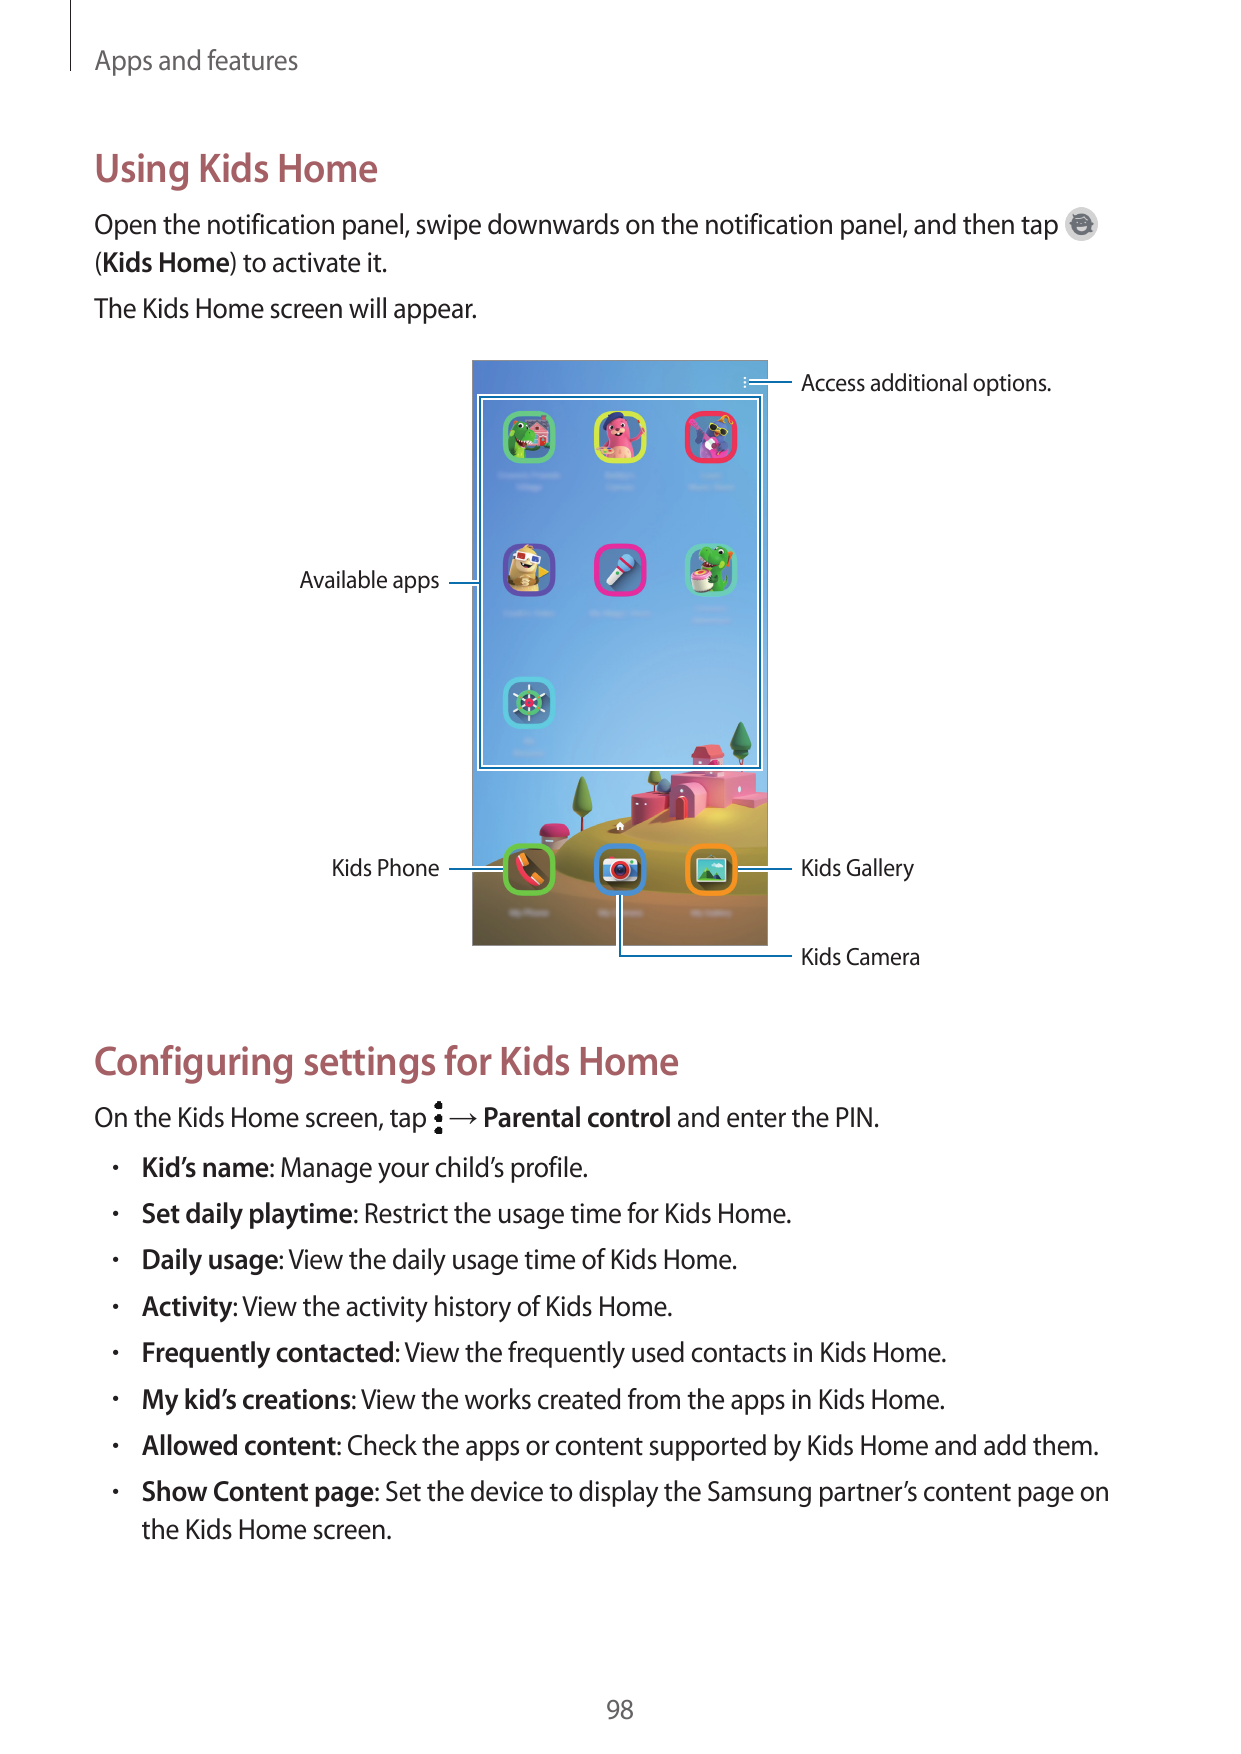 Apps and featuresUsing Kids HomeOpen the notification panel, swipe downwards on the notification panel, and then tap(Kids Home) 